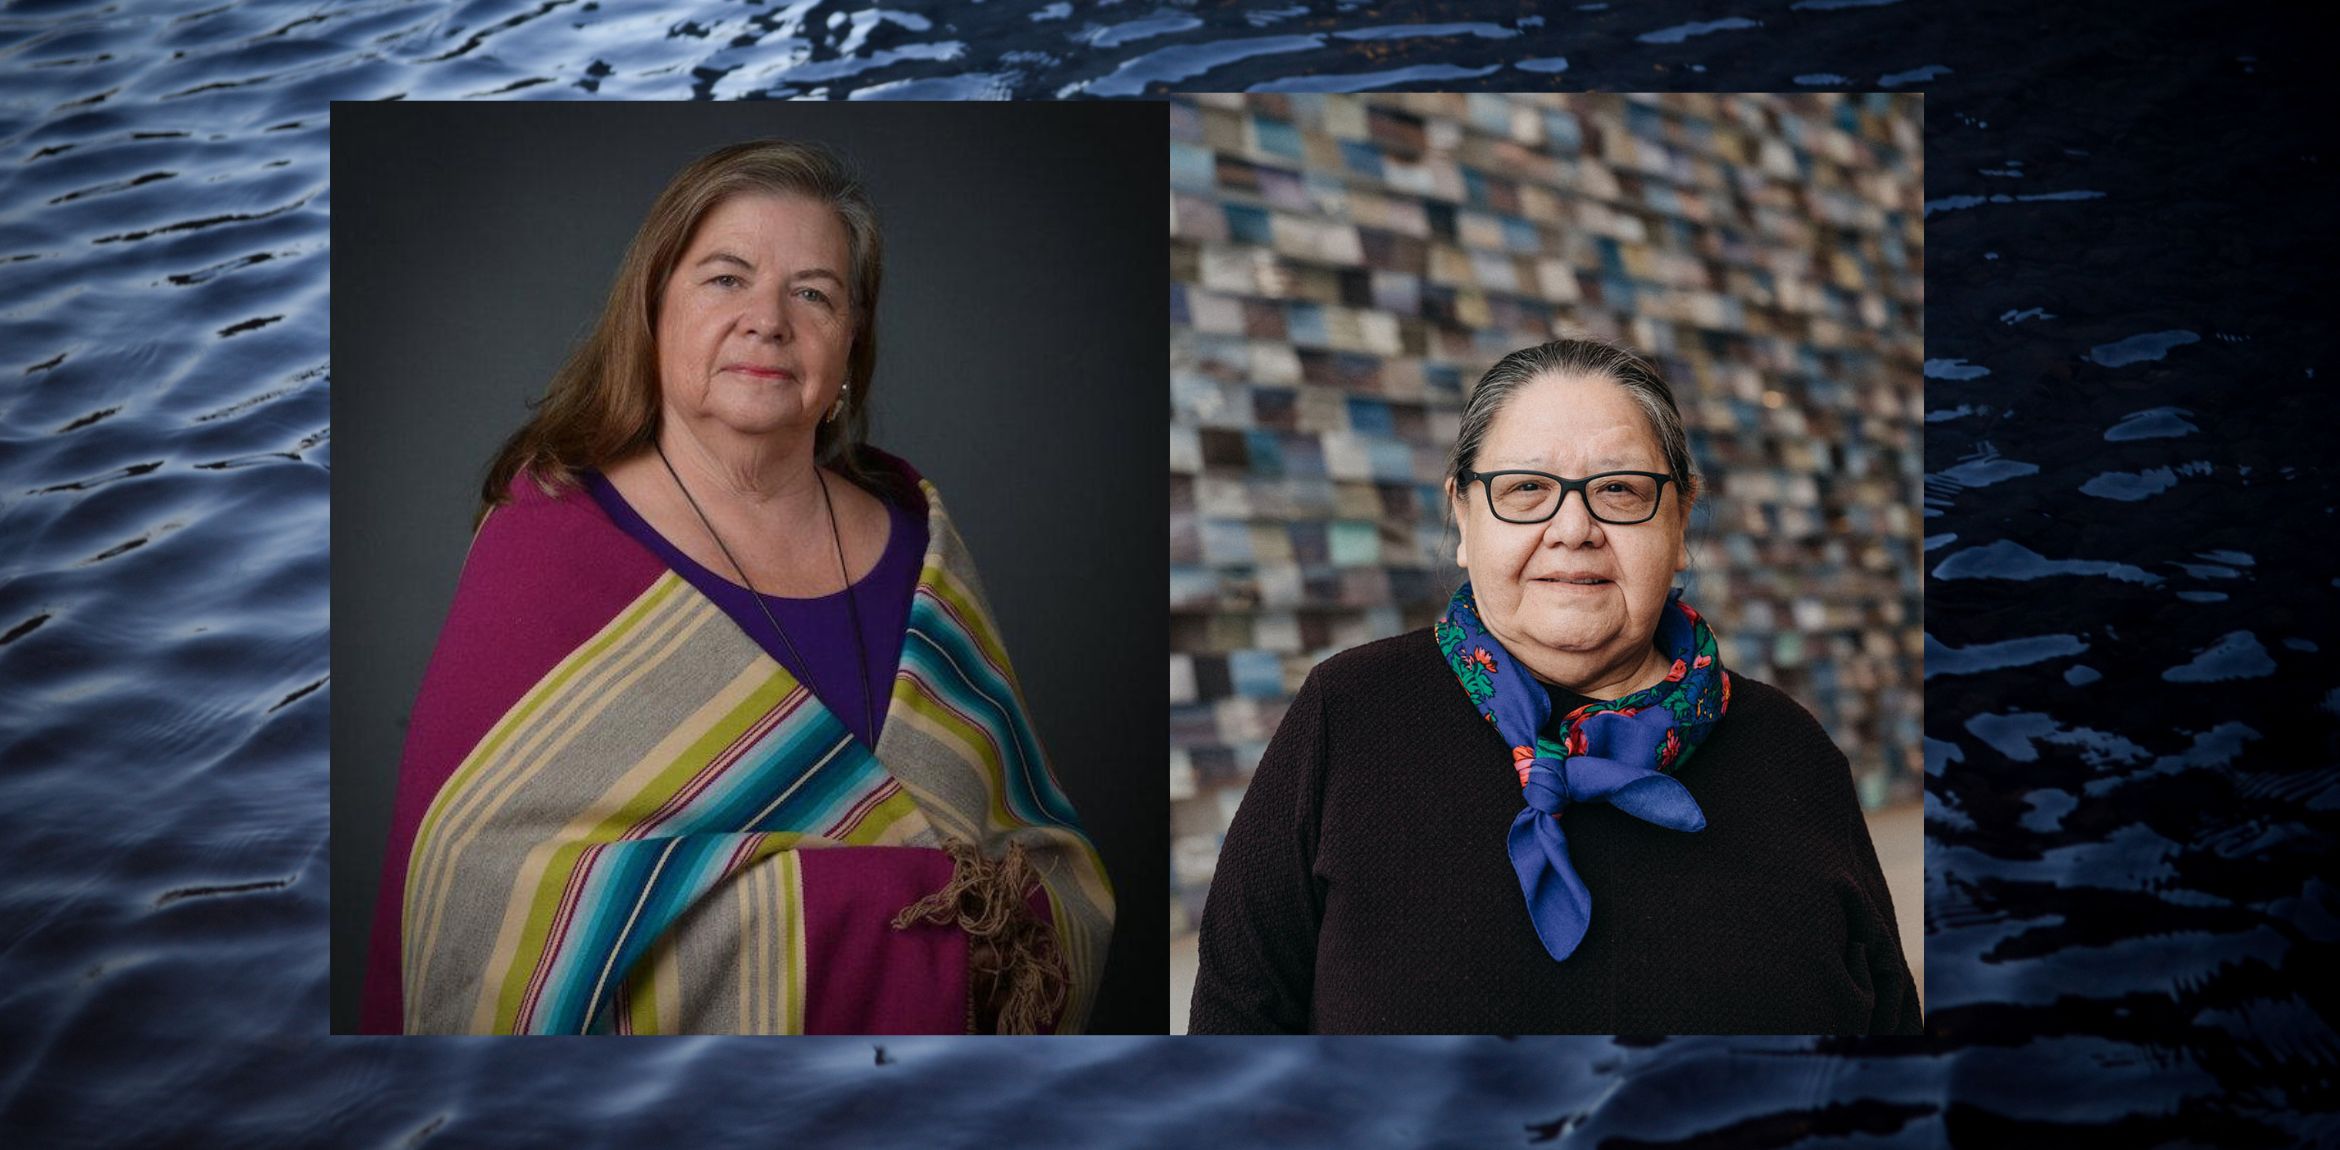 Portraits of artists Anita Fields and Faye HeavyShield in front of a rippling water background